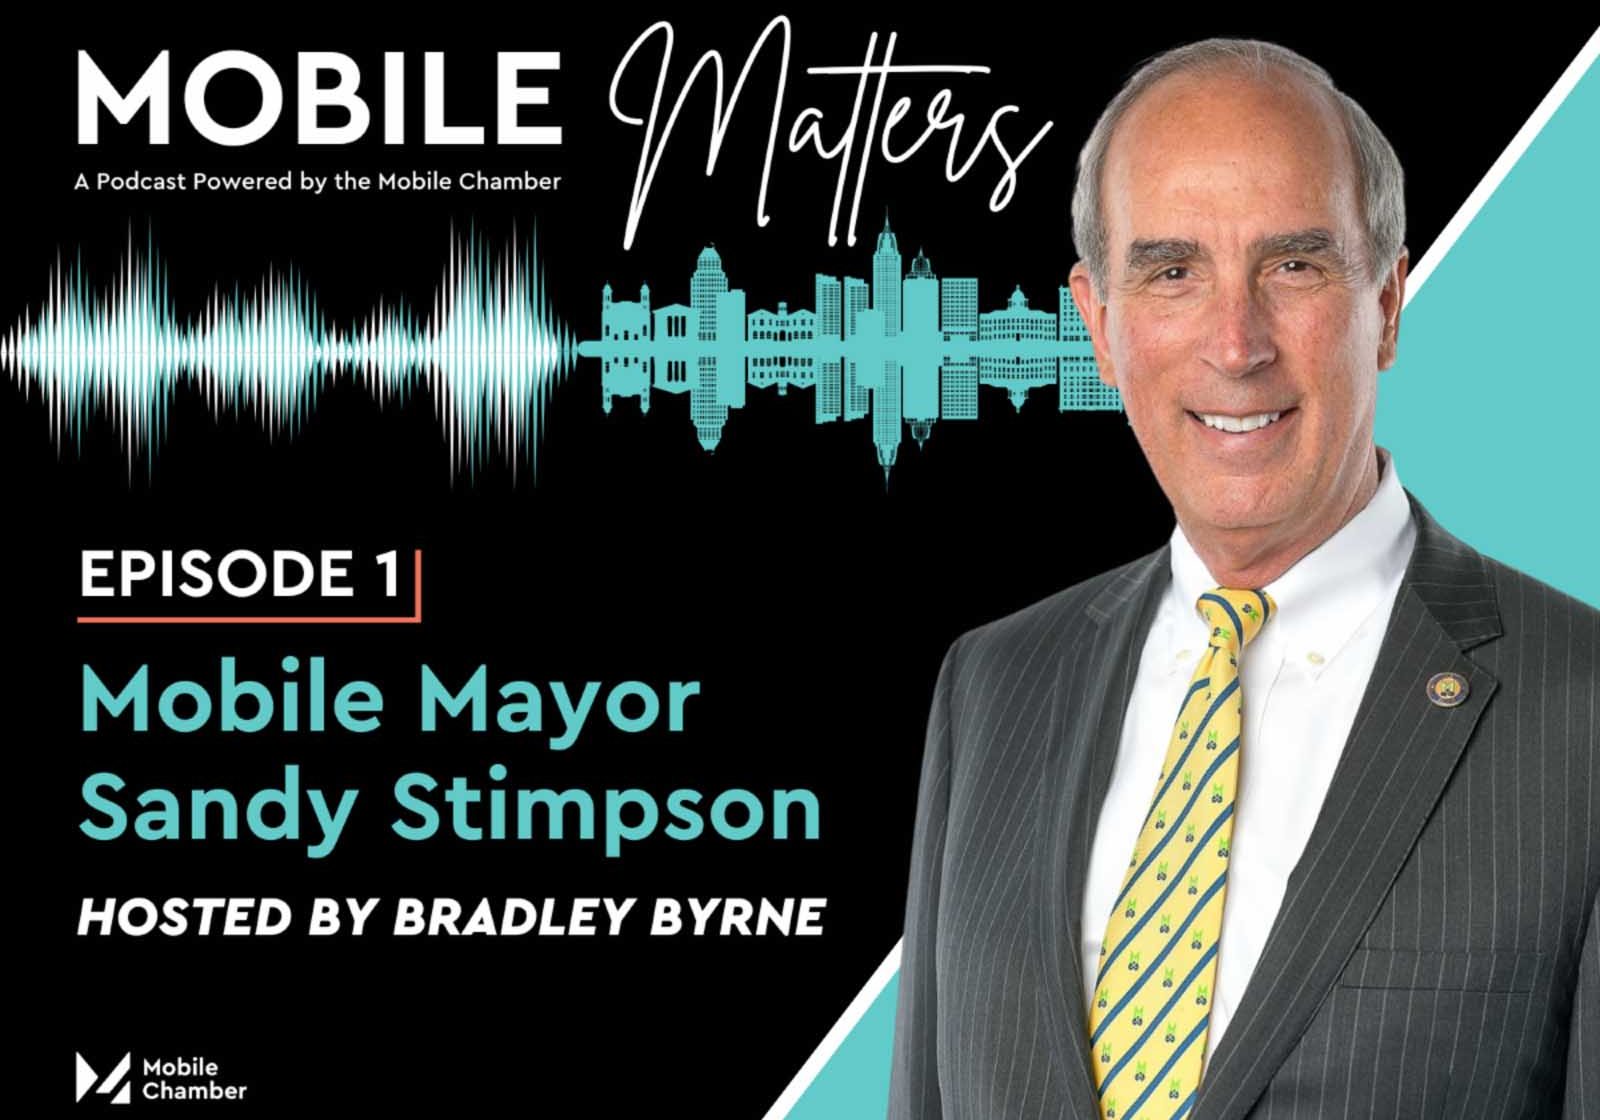 Mobile Chamber&rsquo;s Podcast Launches